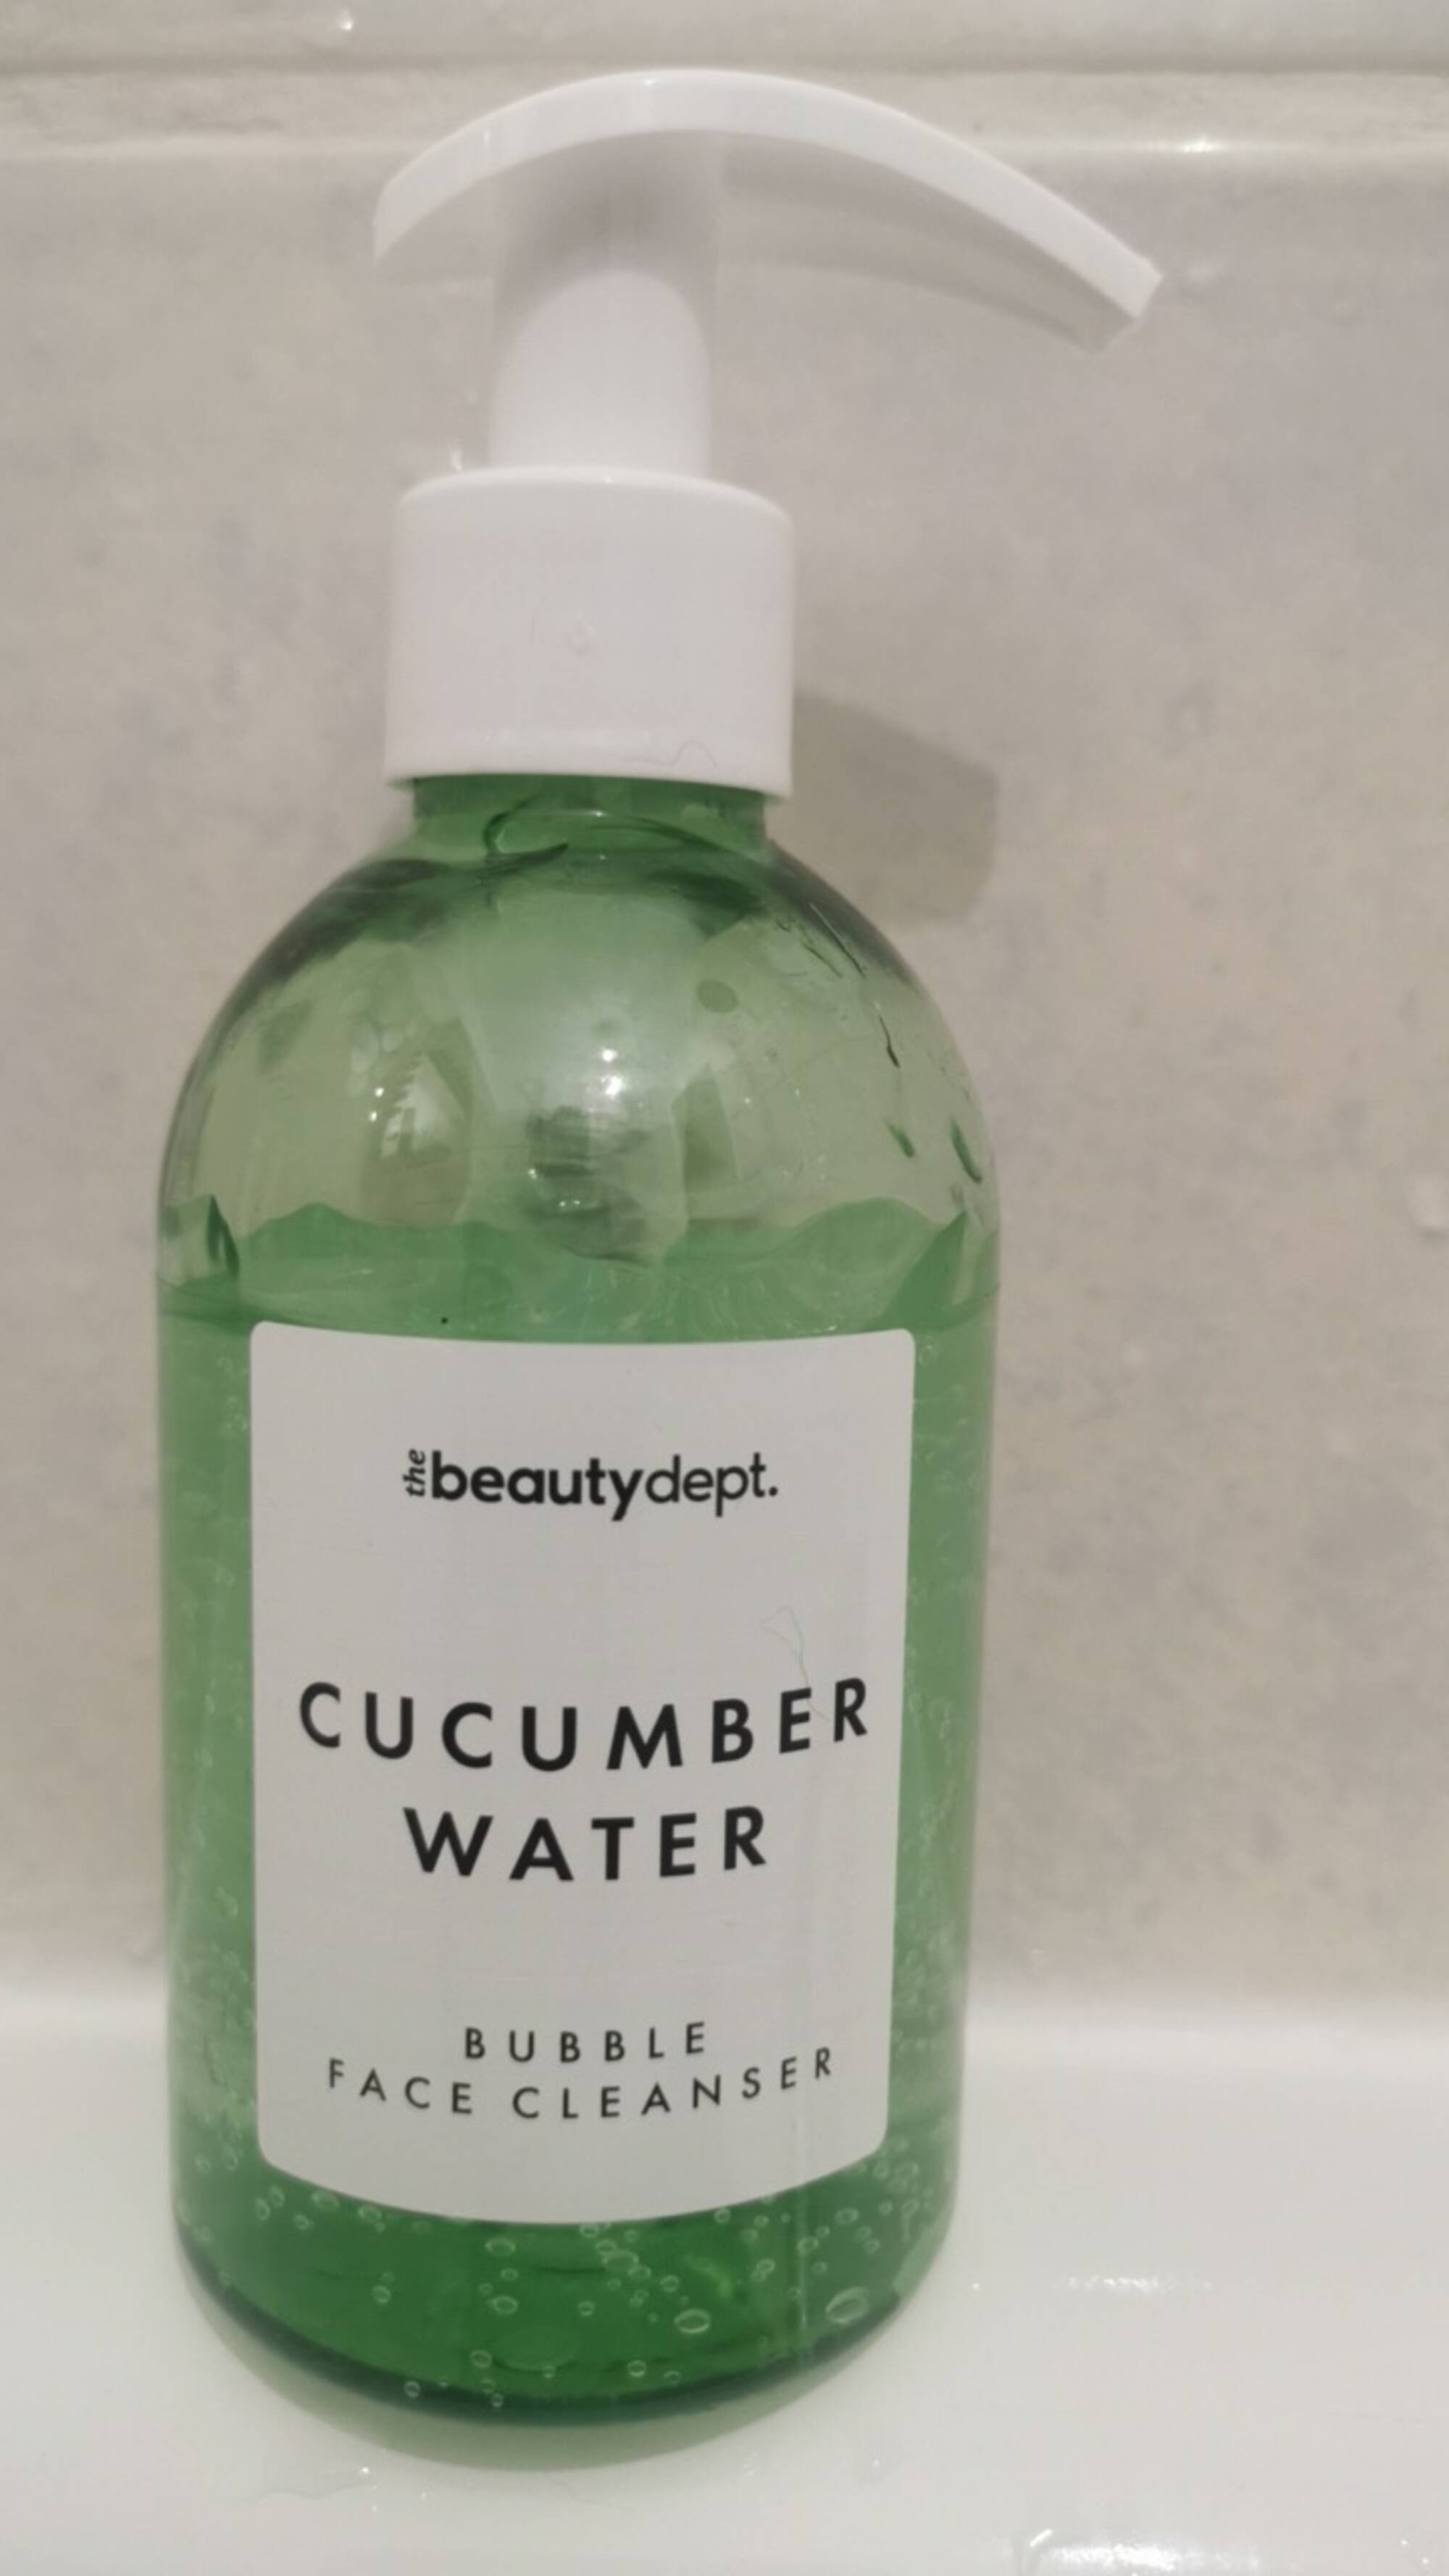 THE BEAUTY DEPT - Cucumber water - Bubble face cleanser